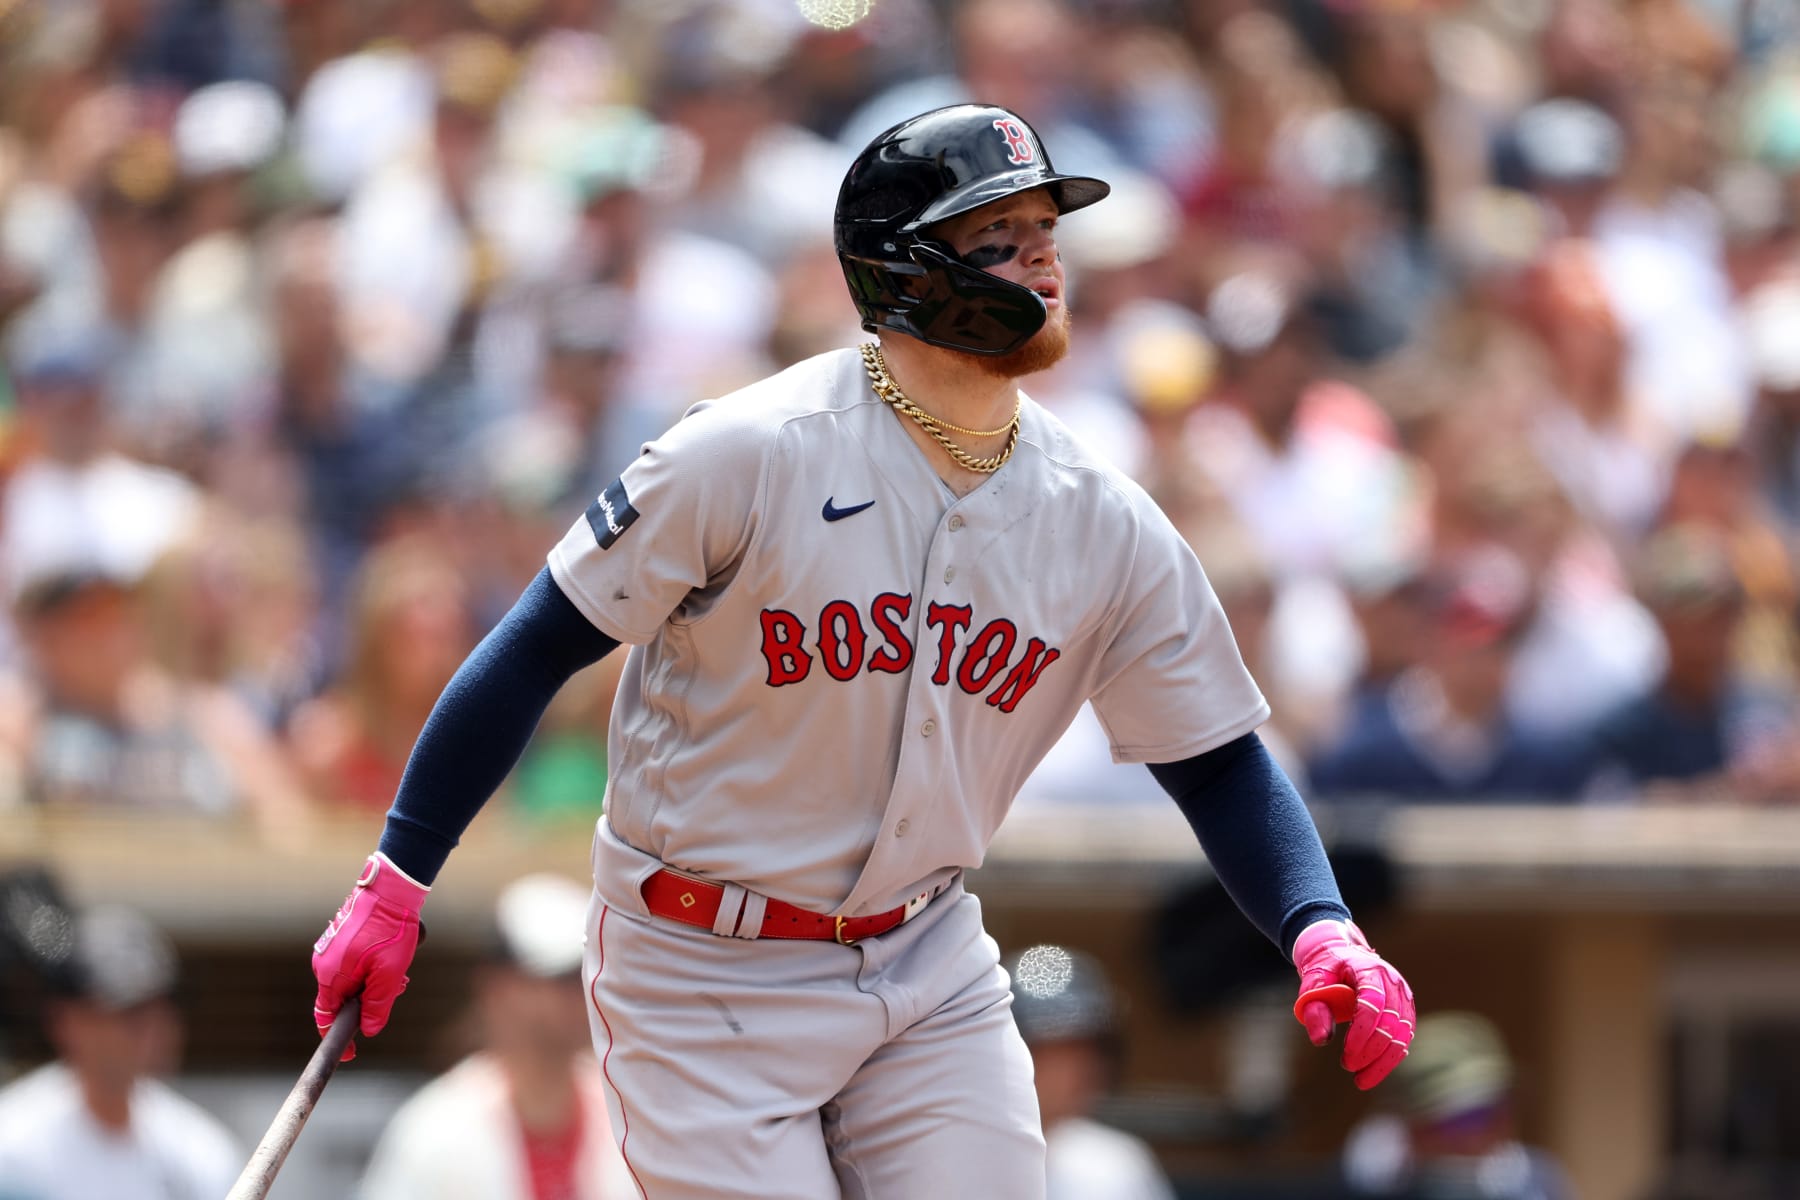 Red Sox: Alex Verdugo may finally hit his slugging potential in 2022